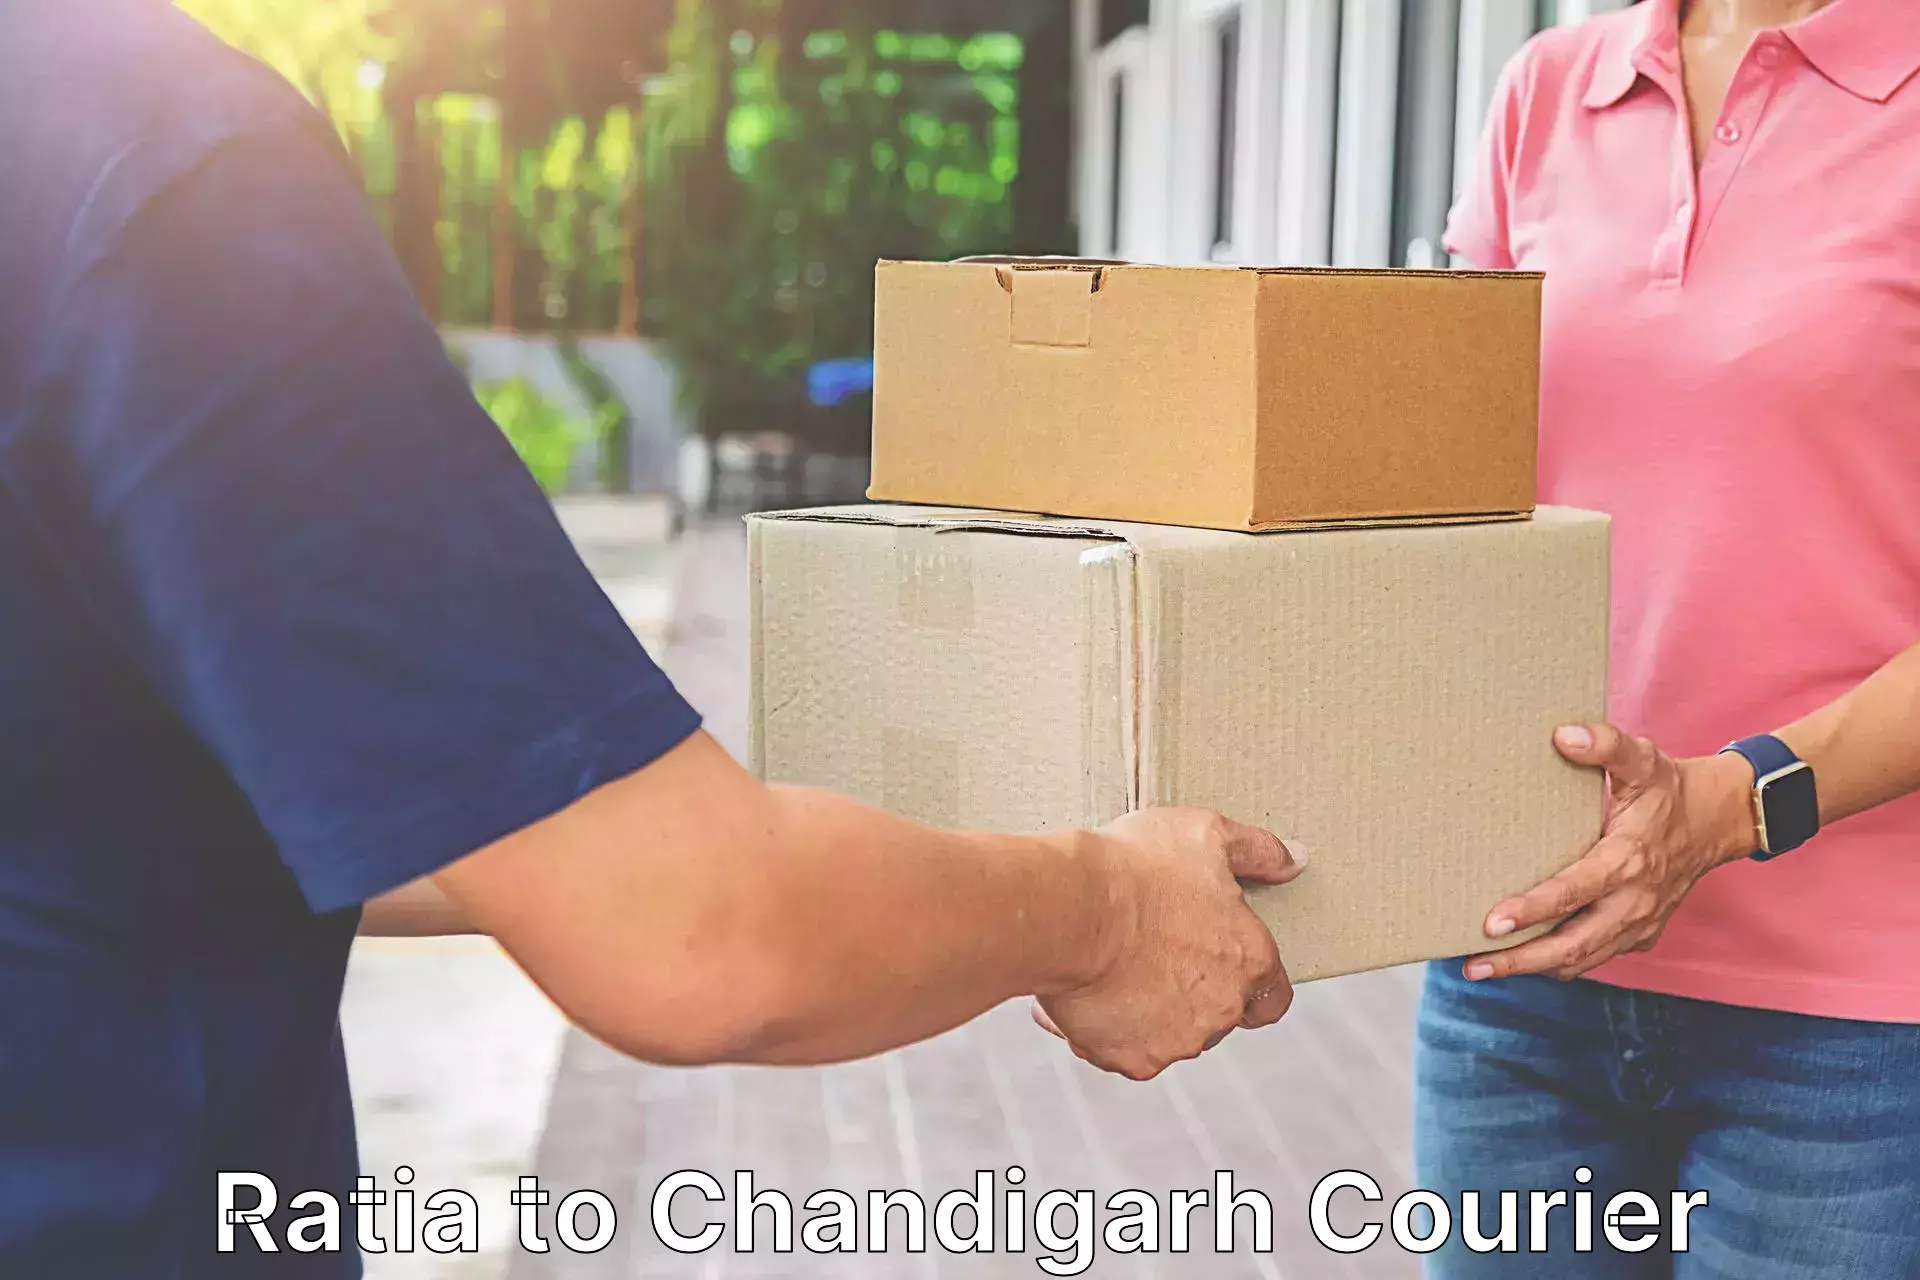 Same-day delivery options Ratia to Panjab University Chandigarh